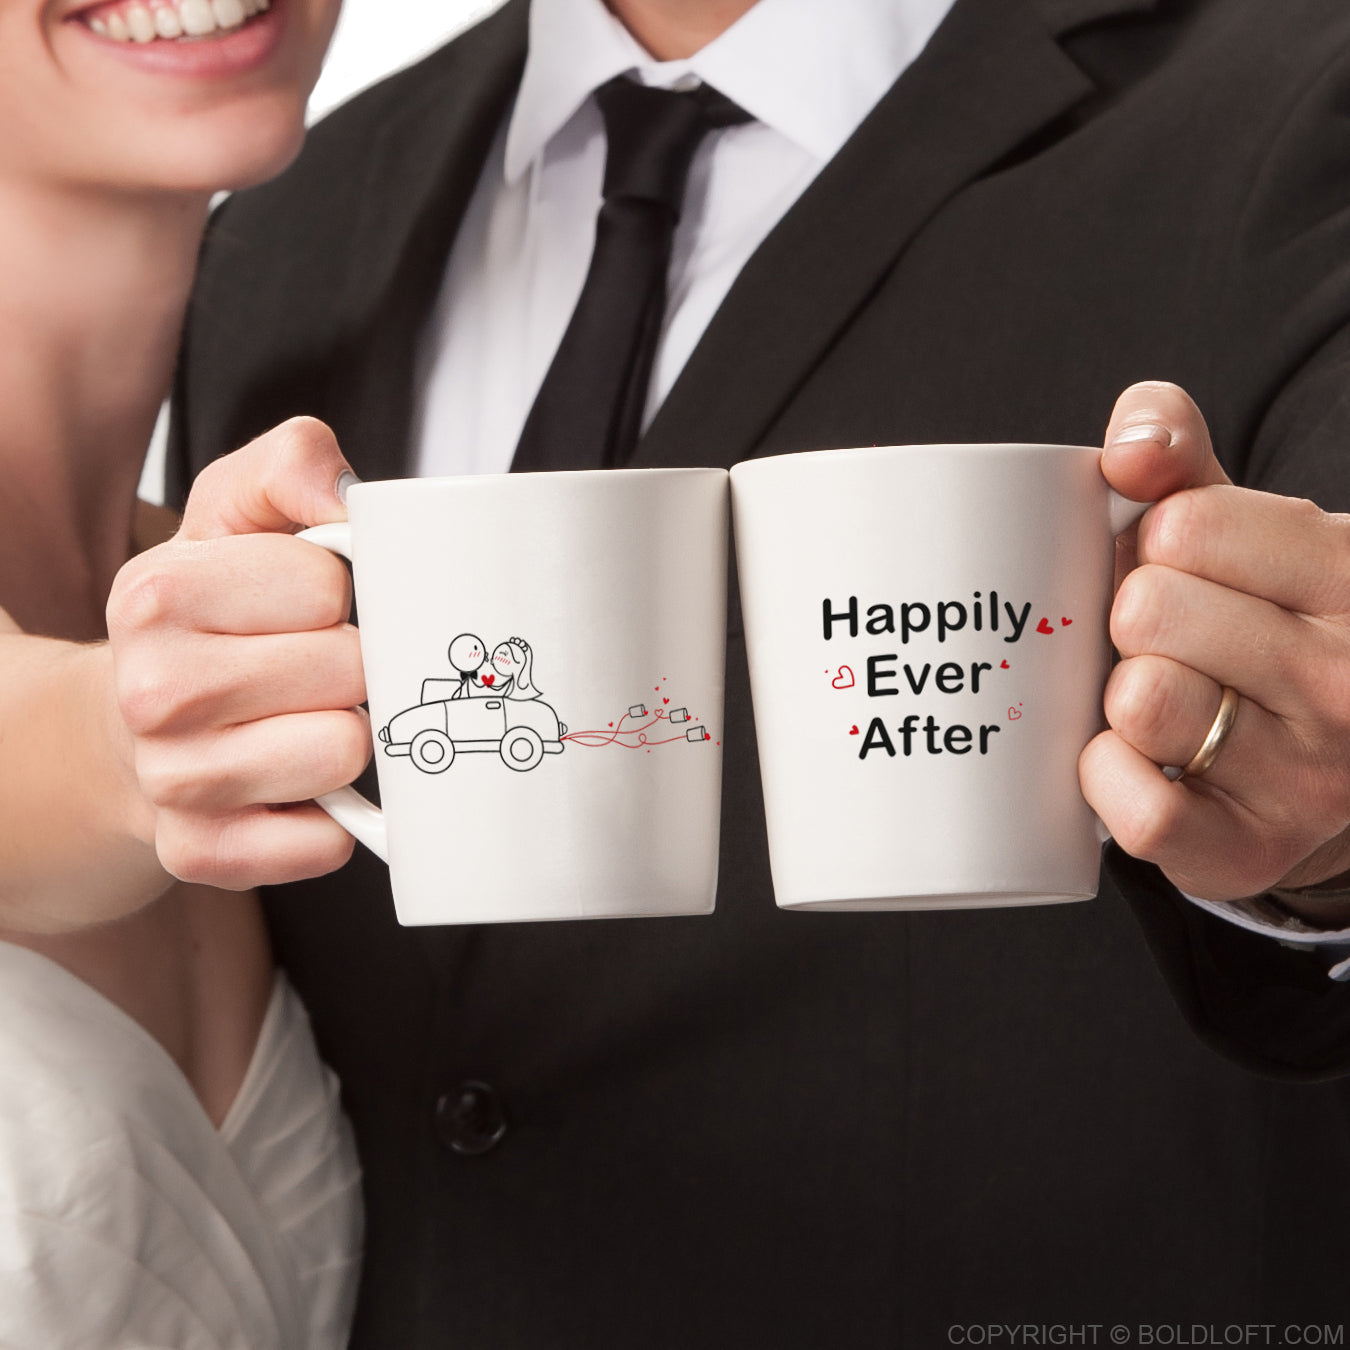 BoldLoft Happily Ever After Wedding Mugs for Bride and Groom. Perfect Engagement, Bridal Shower, or Wedding Gift for Couples.